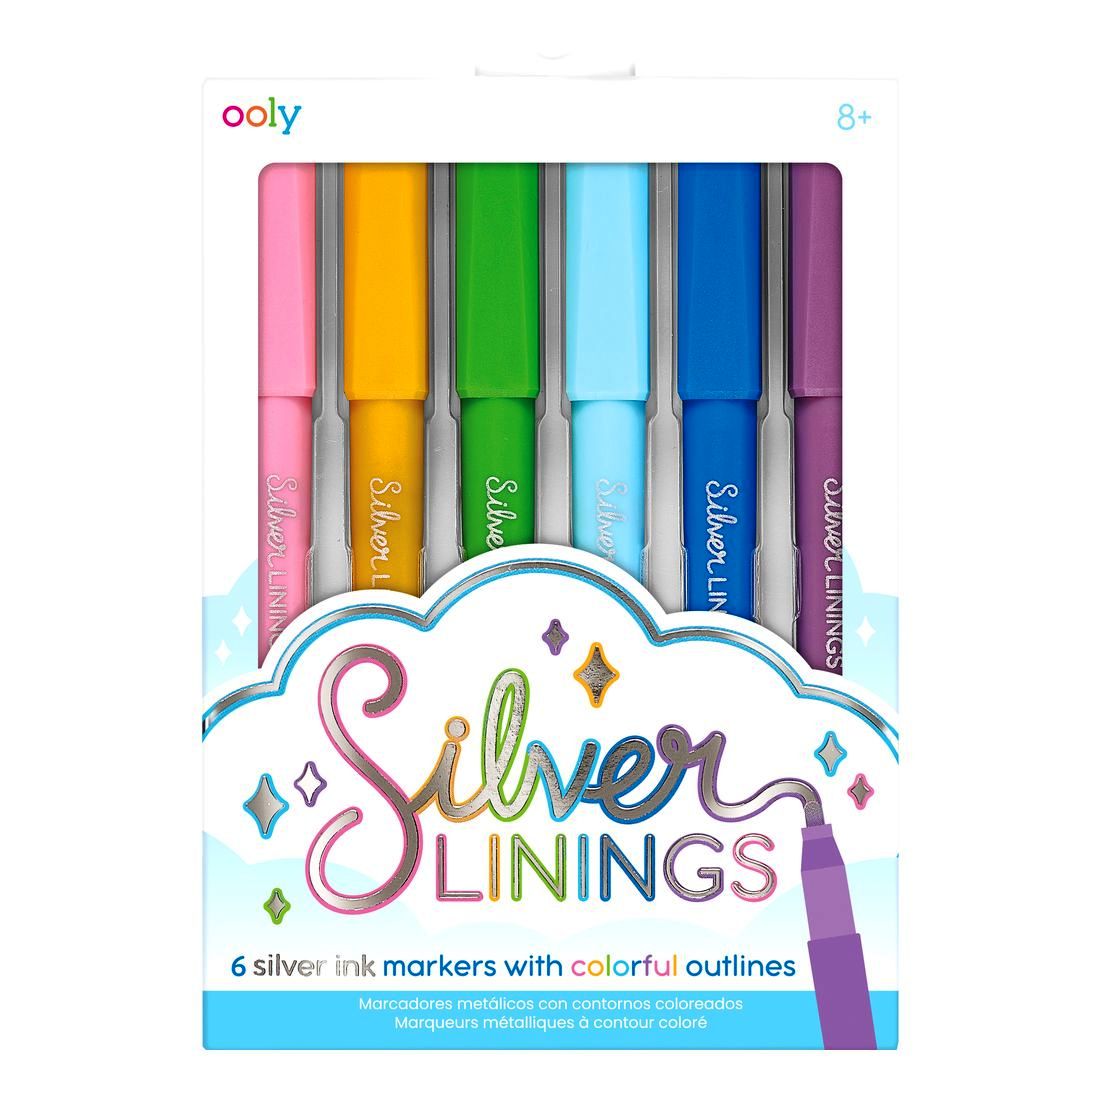 Ooly Silver Linings Outline Markers (Set of 6)